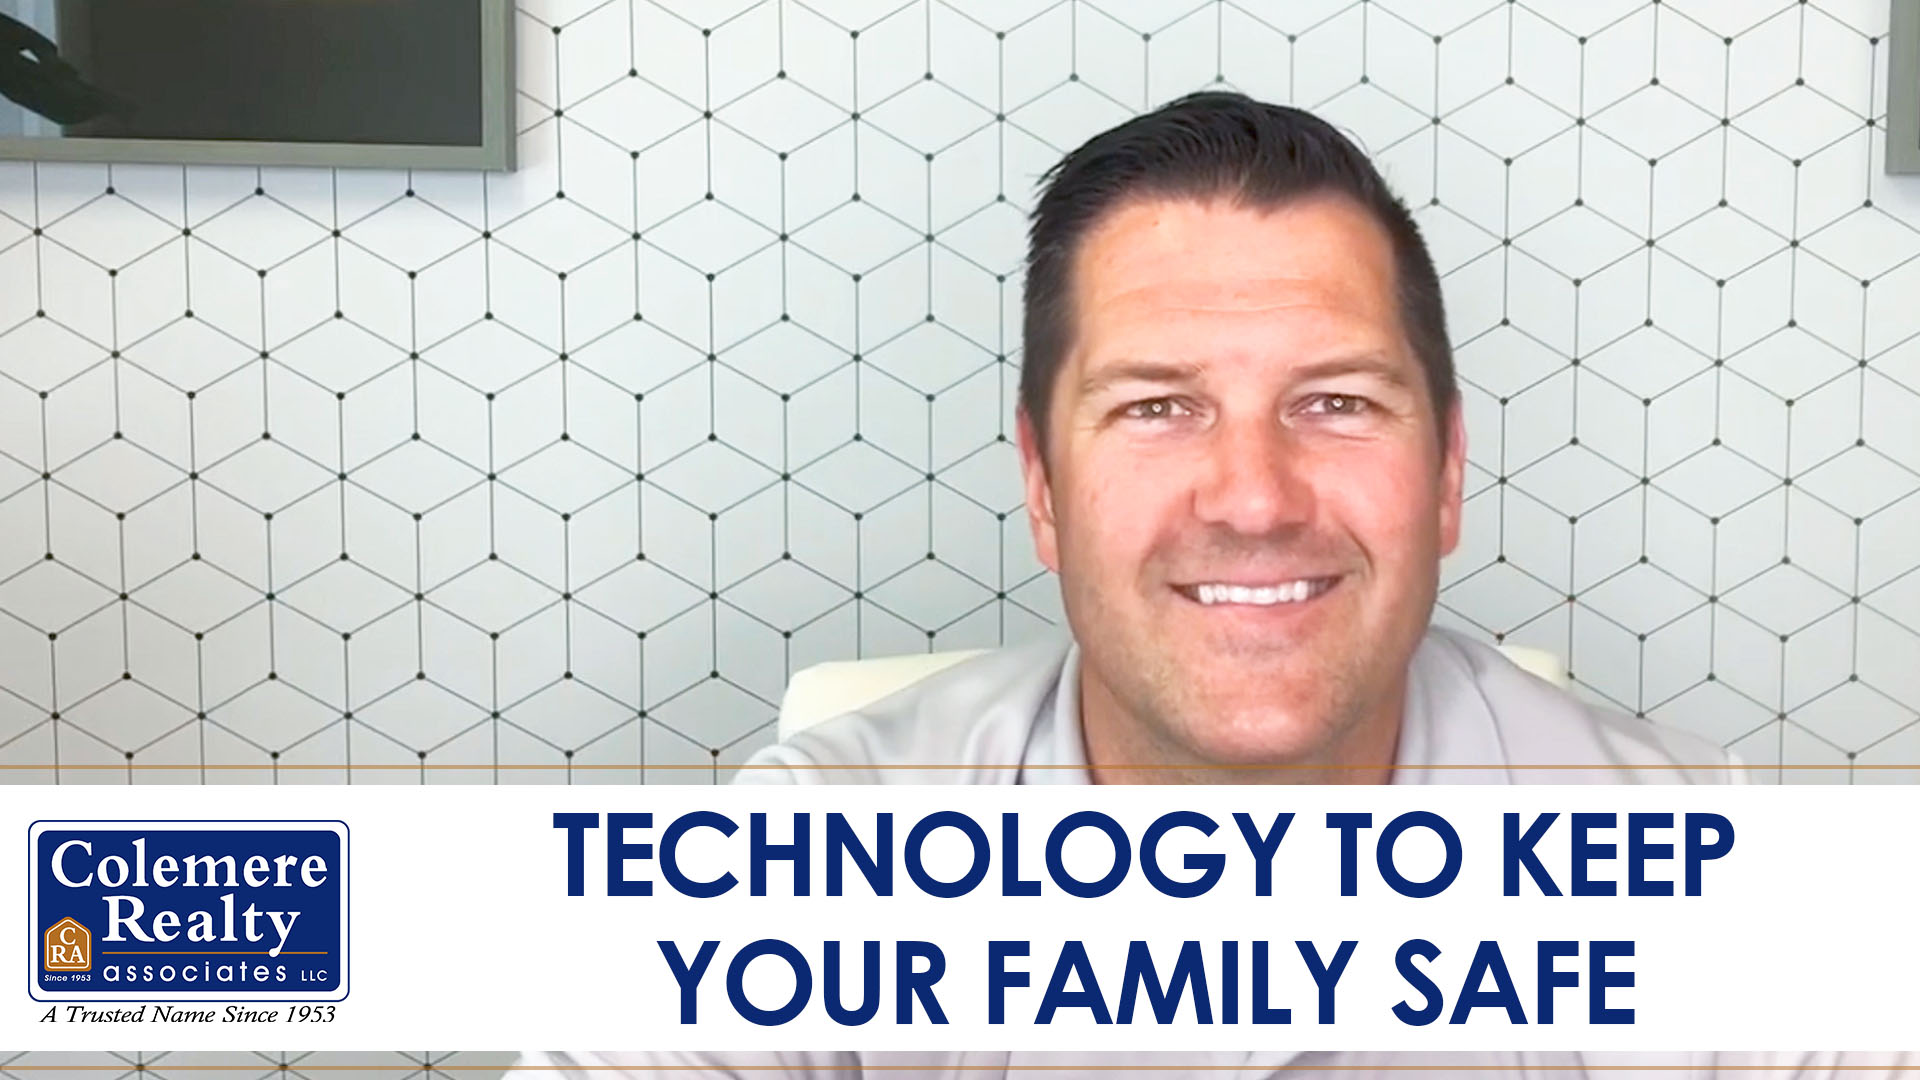 How Can You Keep Your Family Safer?